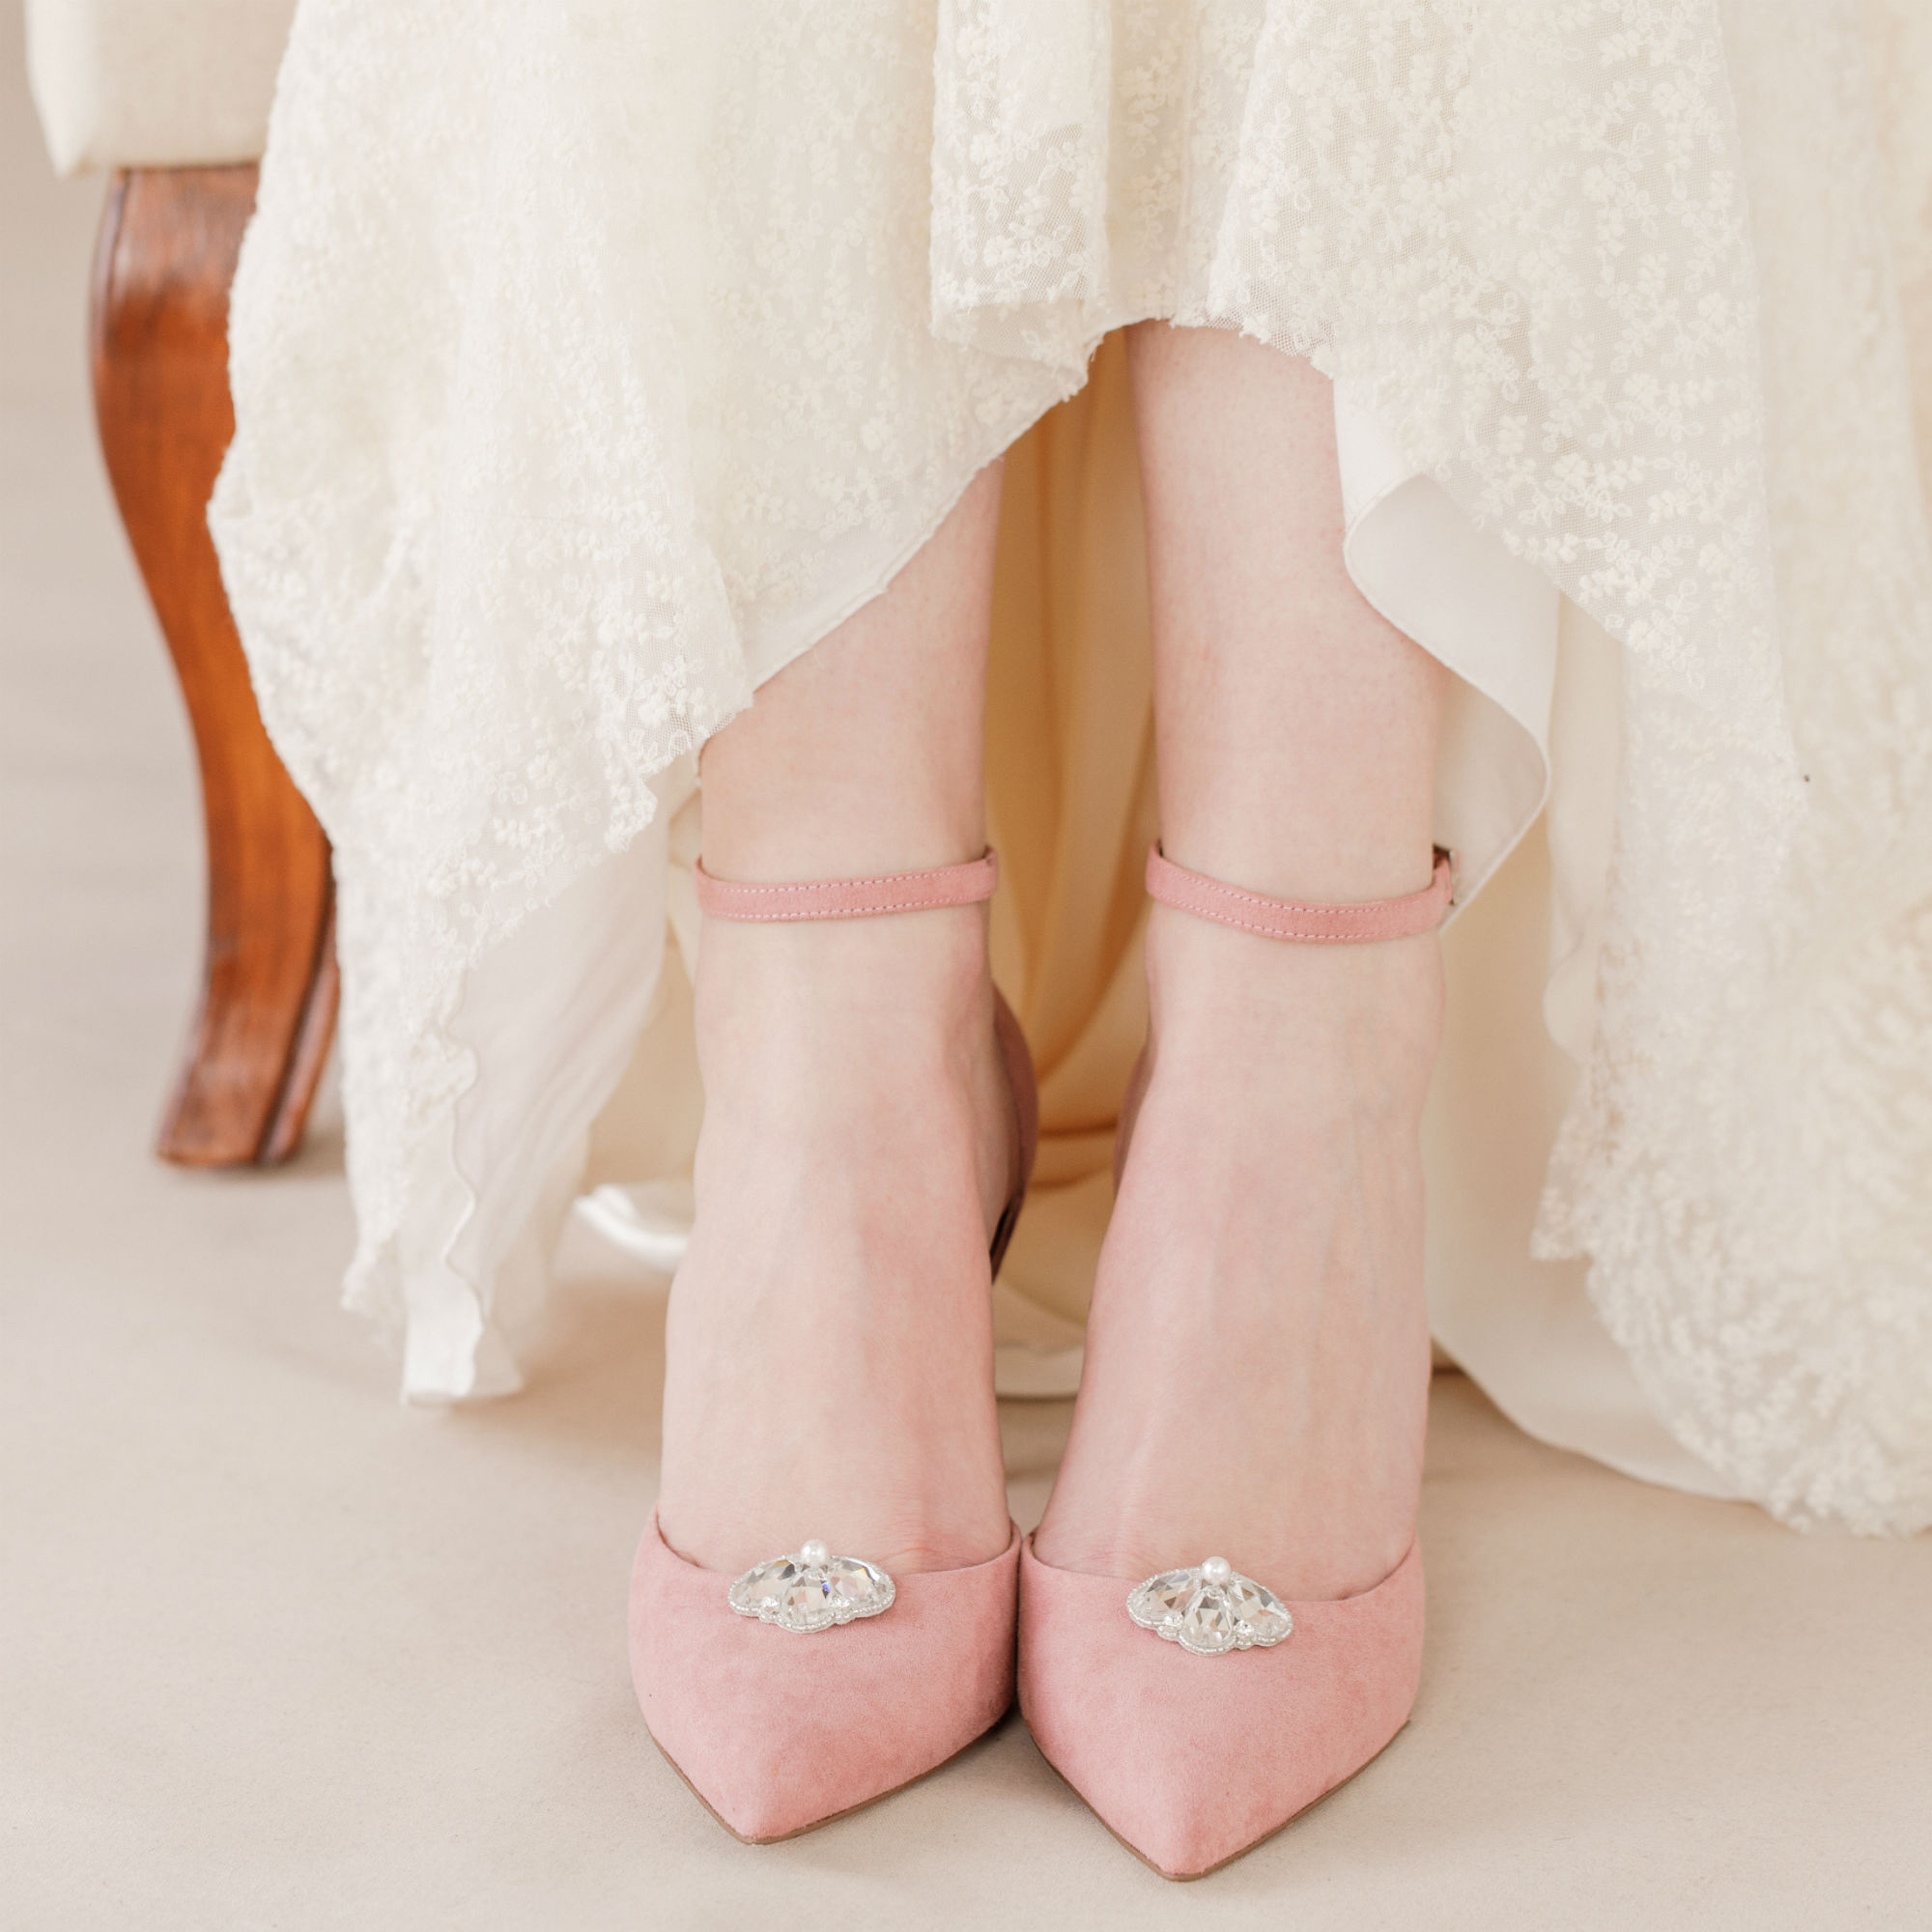 1 The Deco inspired Casey shoe clip by Britten Weddings